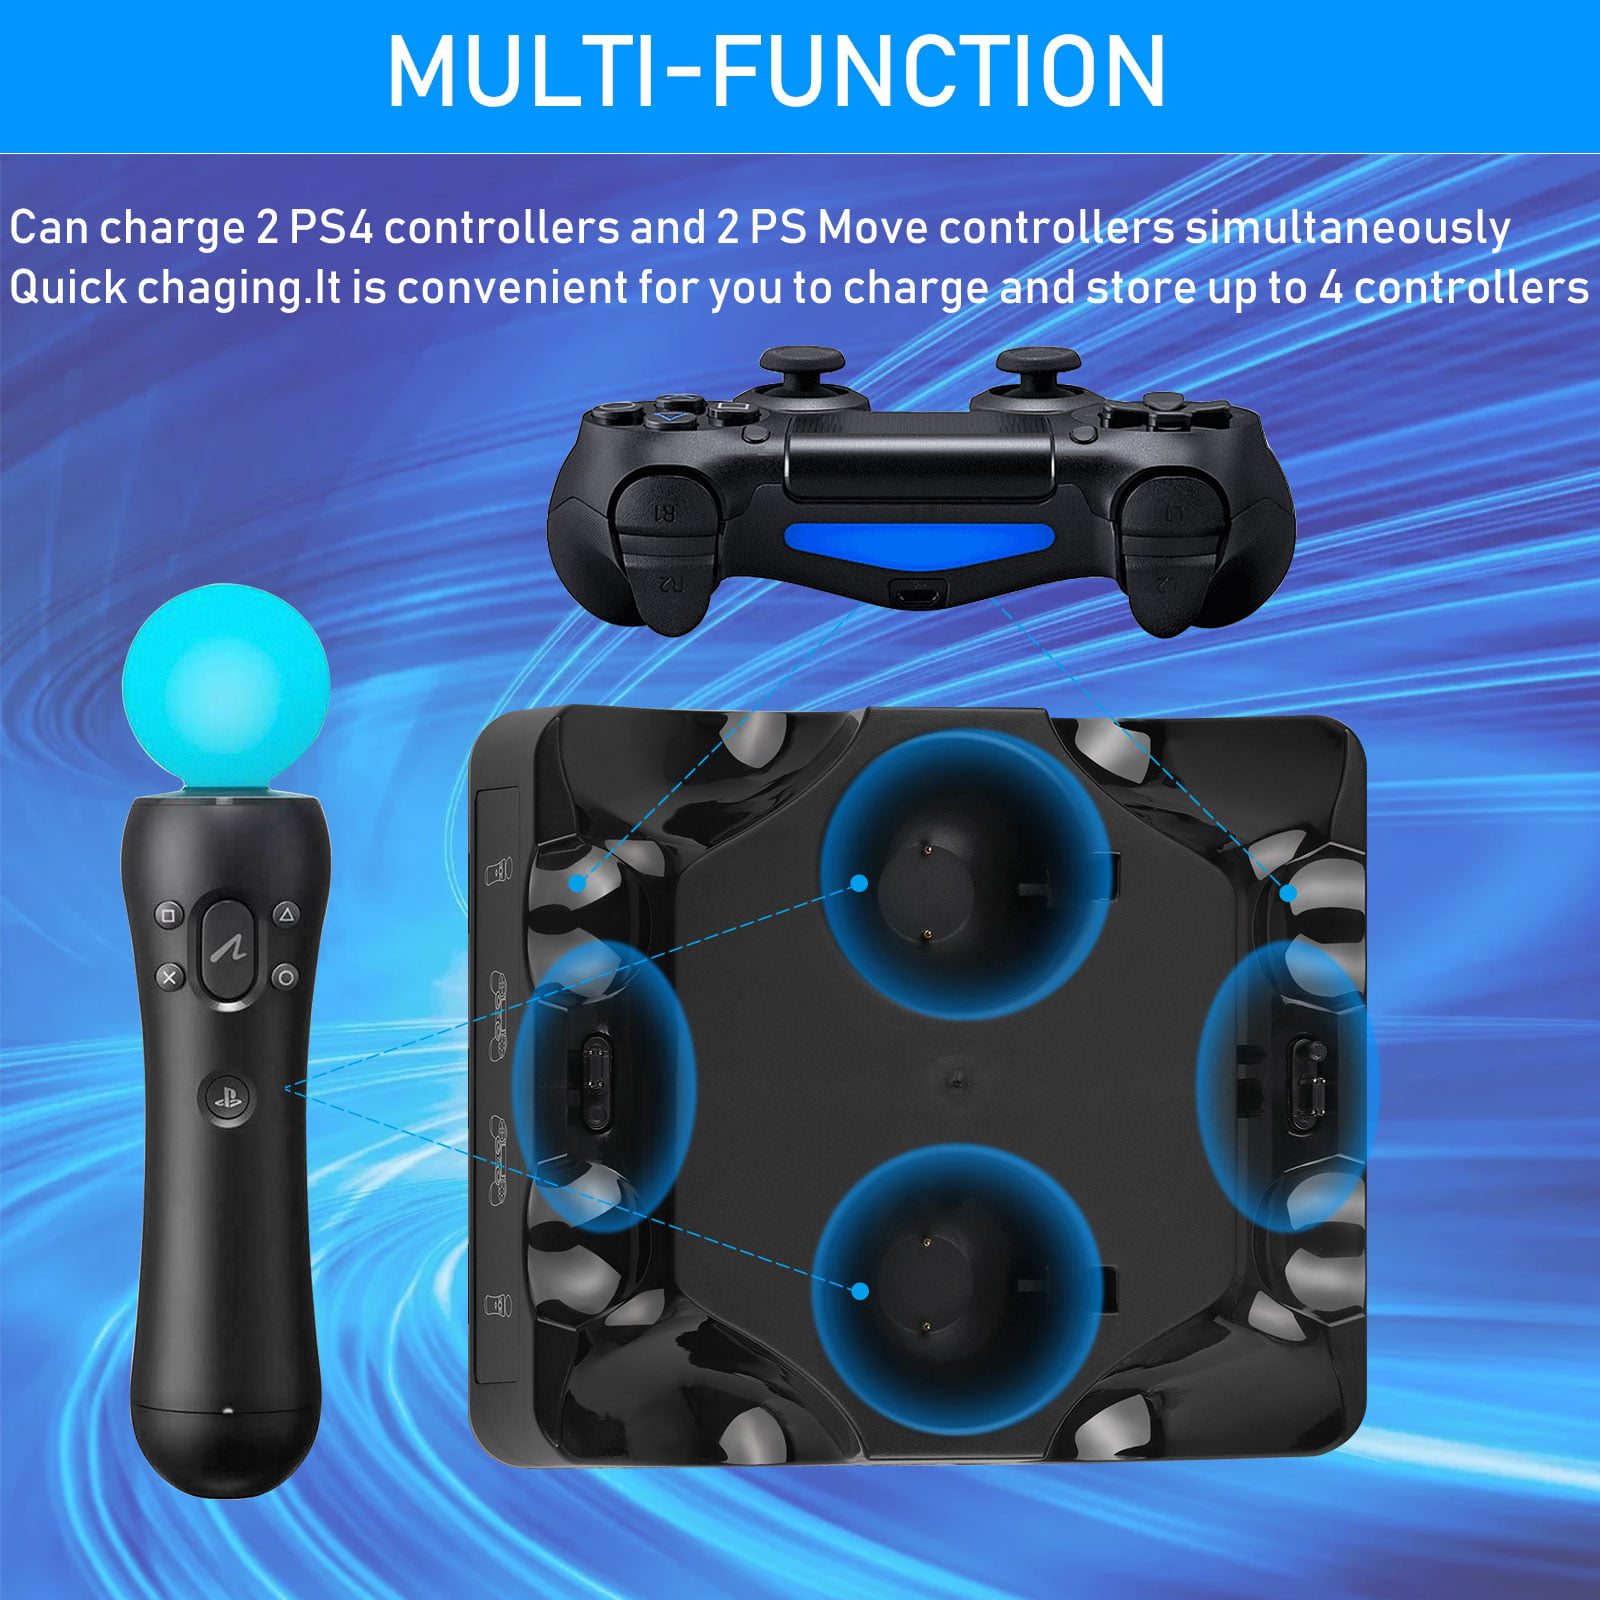 4-in-1 Controller Charging Station Stand for Playstation PS4/MOVE/PS4 VR Move, EEEkit Quad Charger for PS4 Move Controller VR Move, Black - Walmart.com